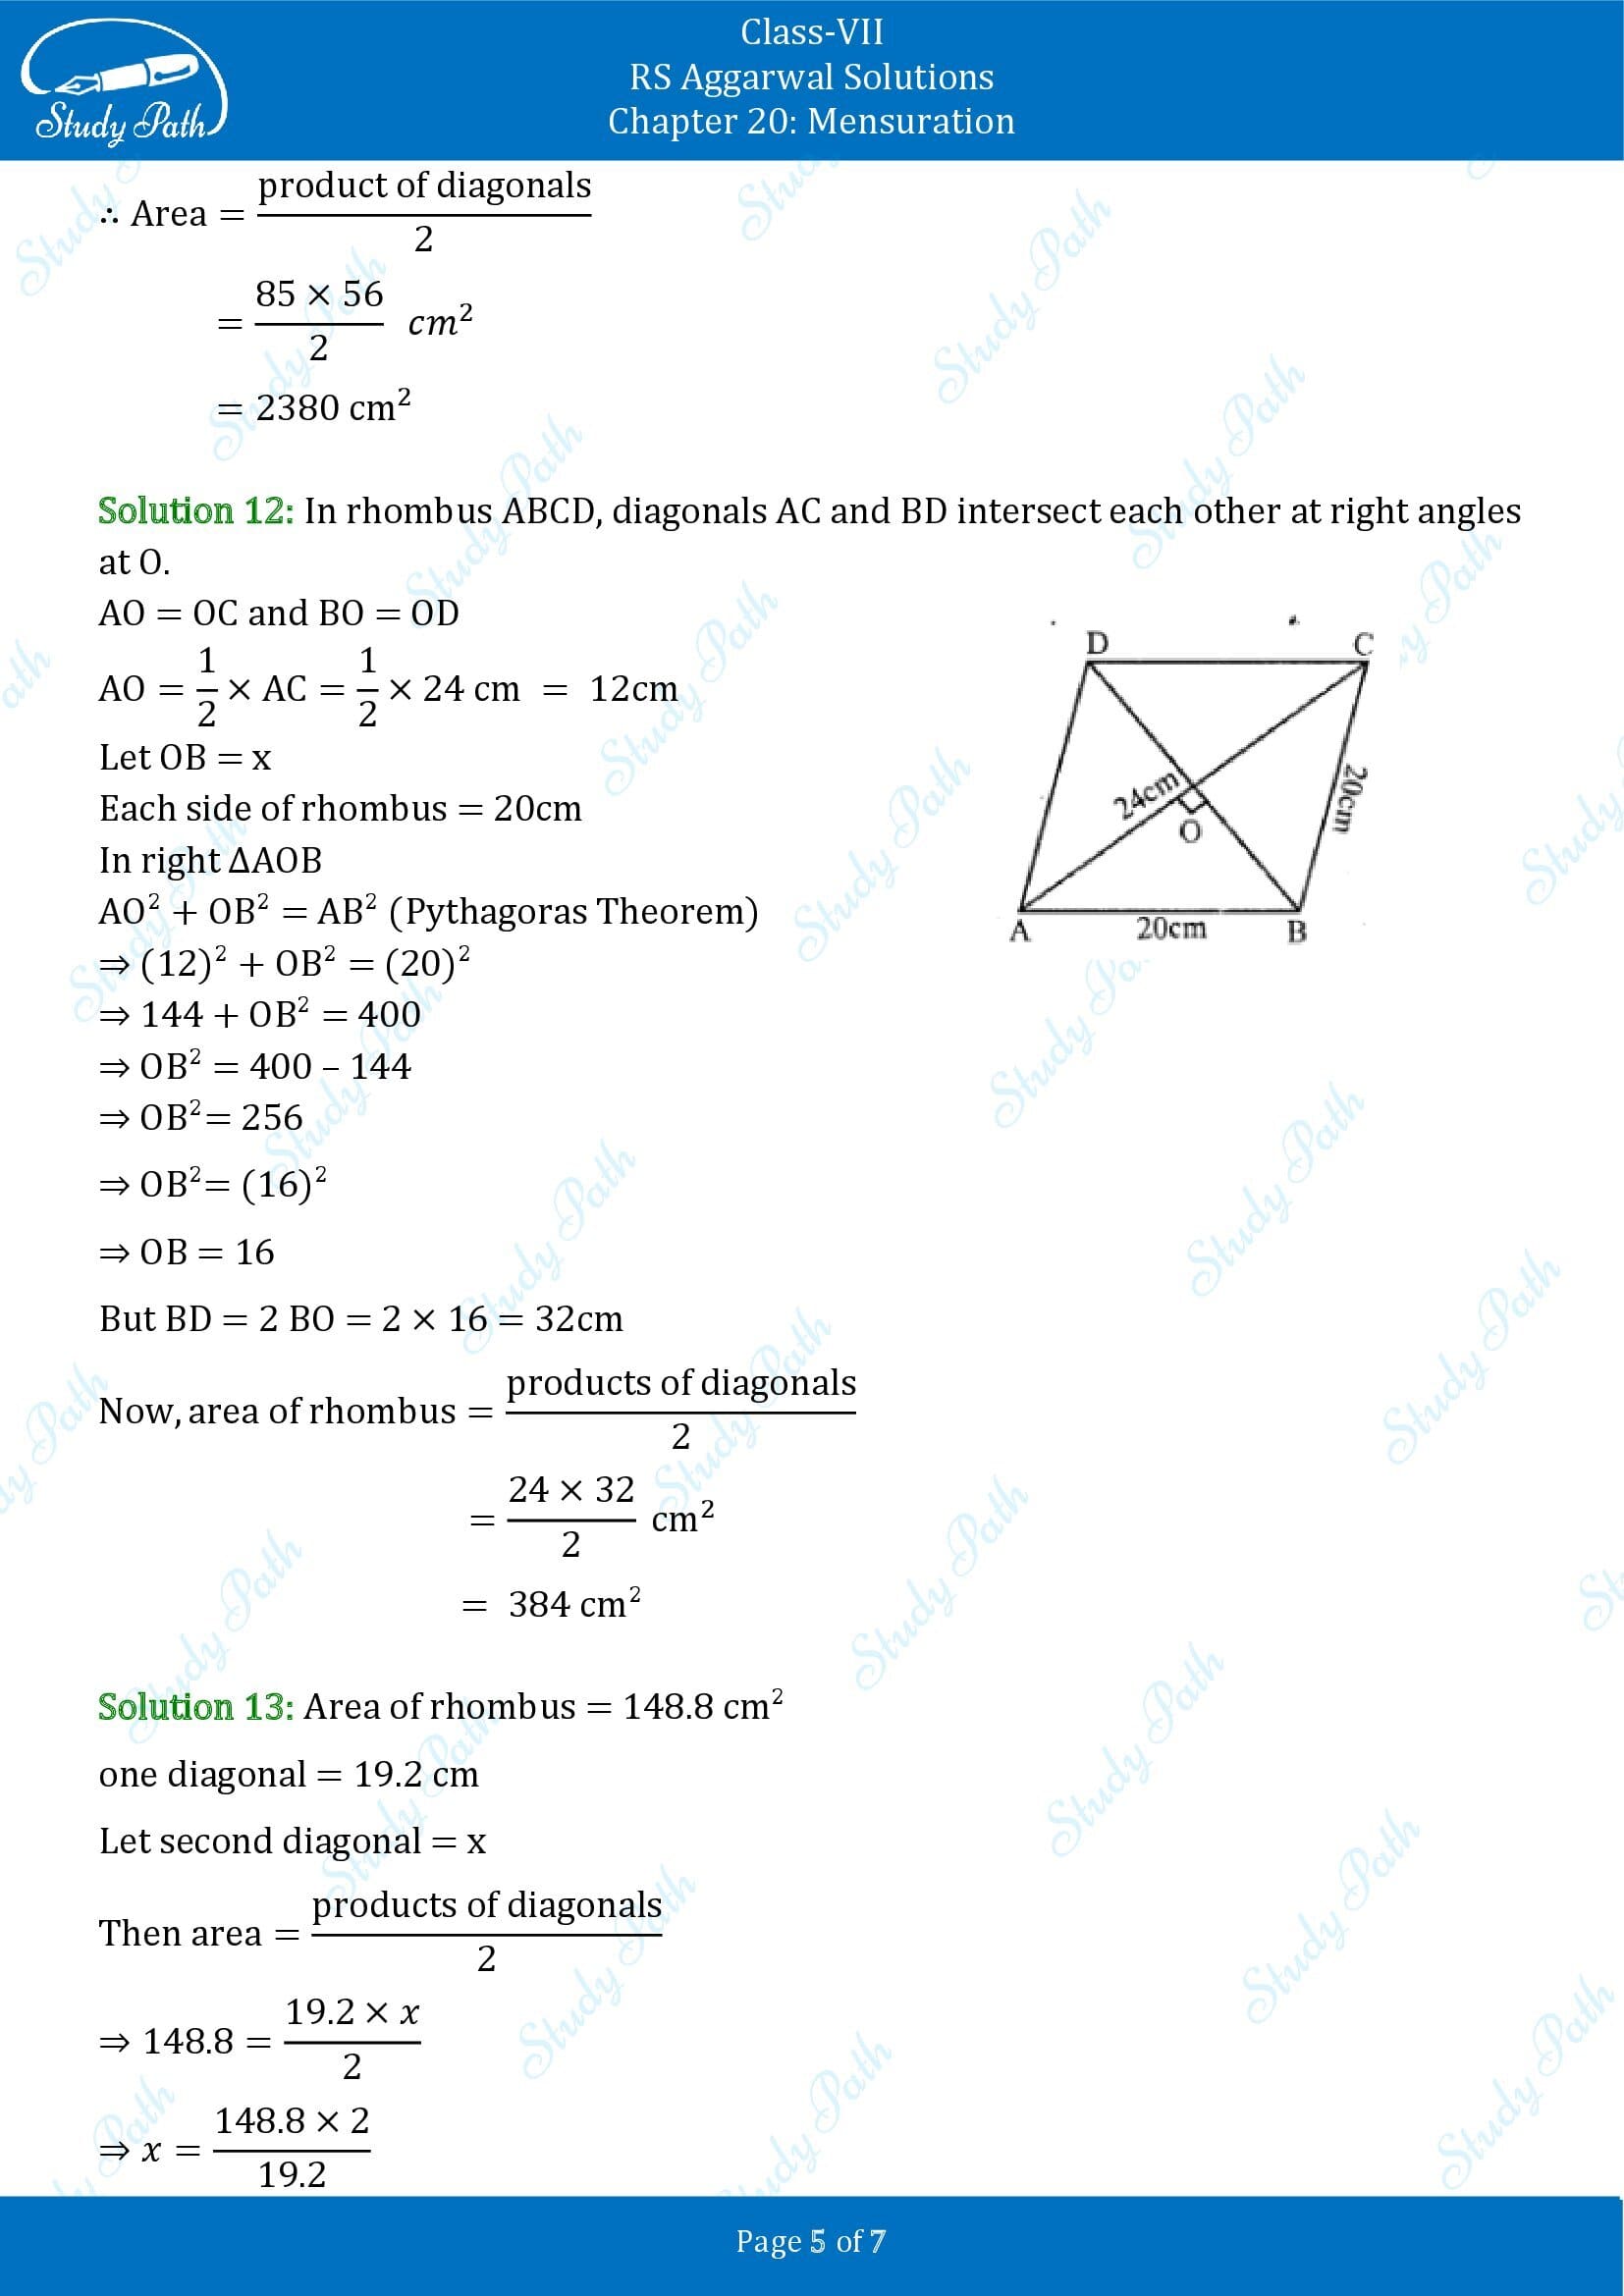 RS Aggarwal Solutions Class 7 Chapter 20 Mensuration Exercise 20C 00005